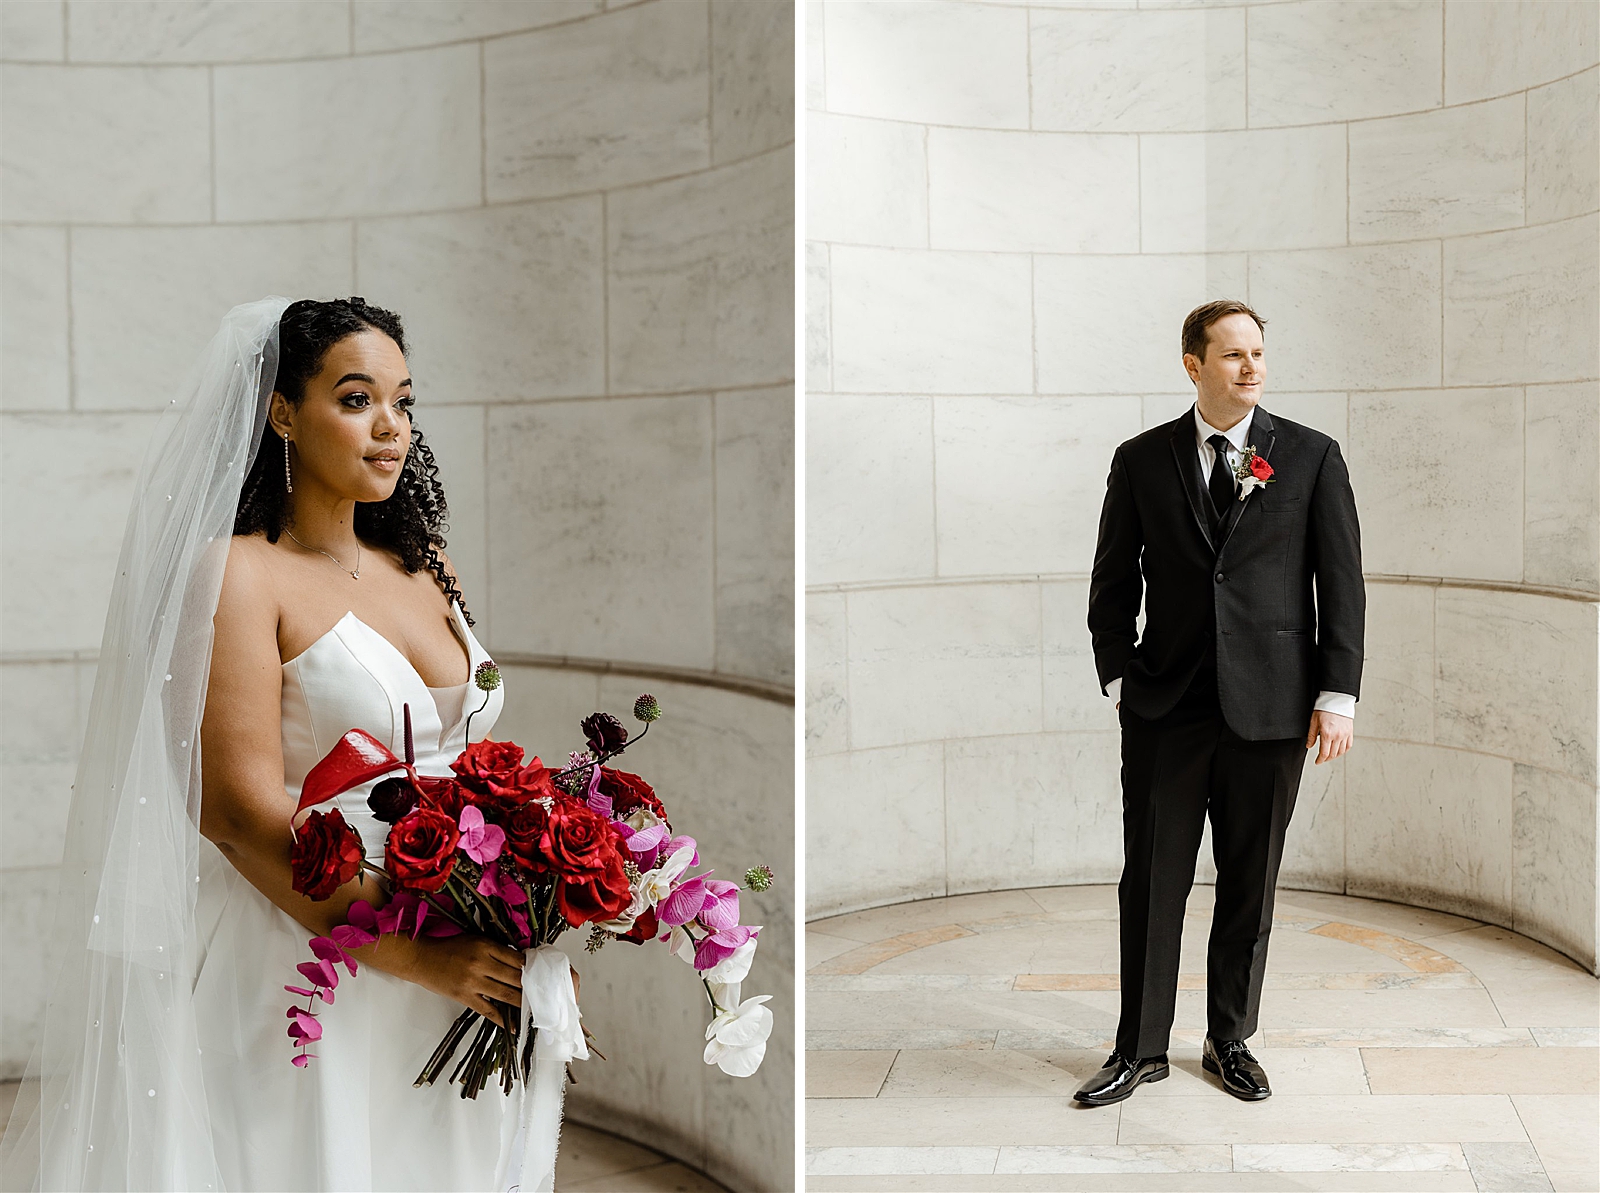 Left photo: Bride is her wedding gown holding her bouquet. 
Right photo: Full body shot of Groom in his suit. 